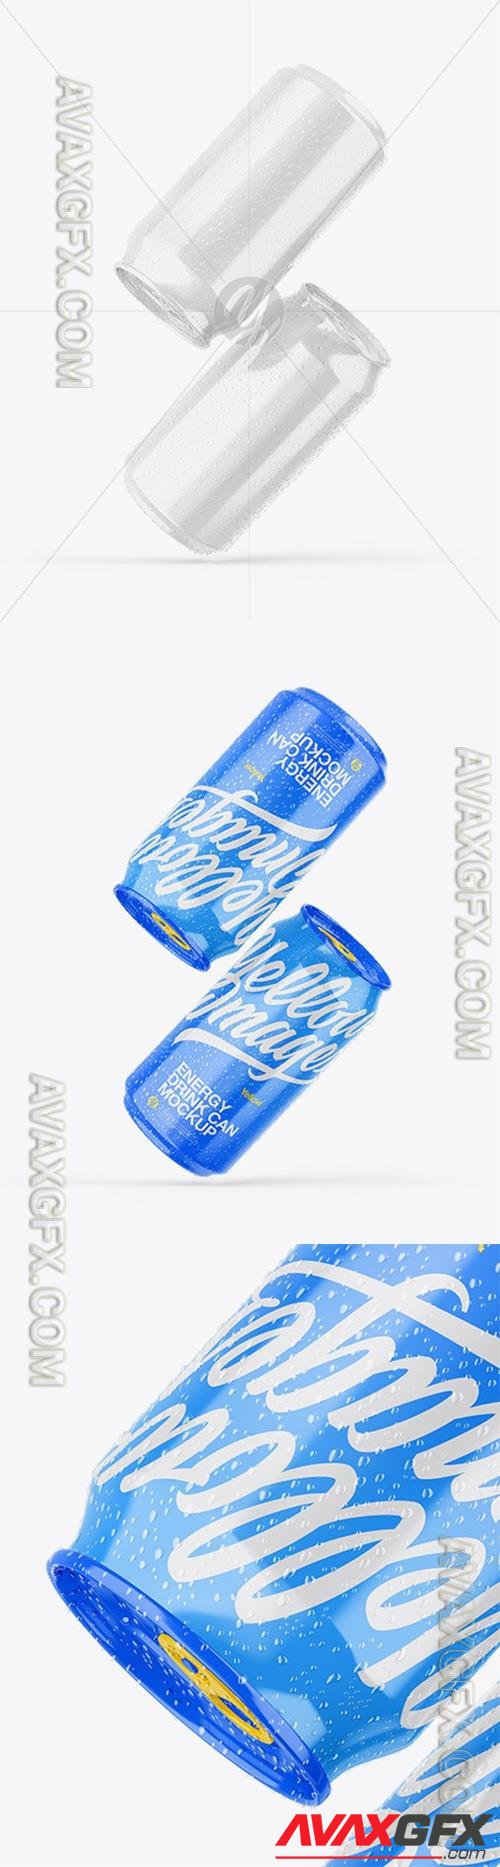 Two Glossy Cans Mockup 65281 TIF